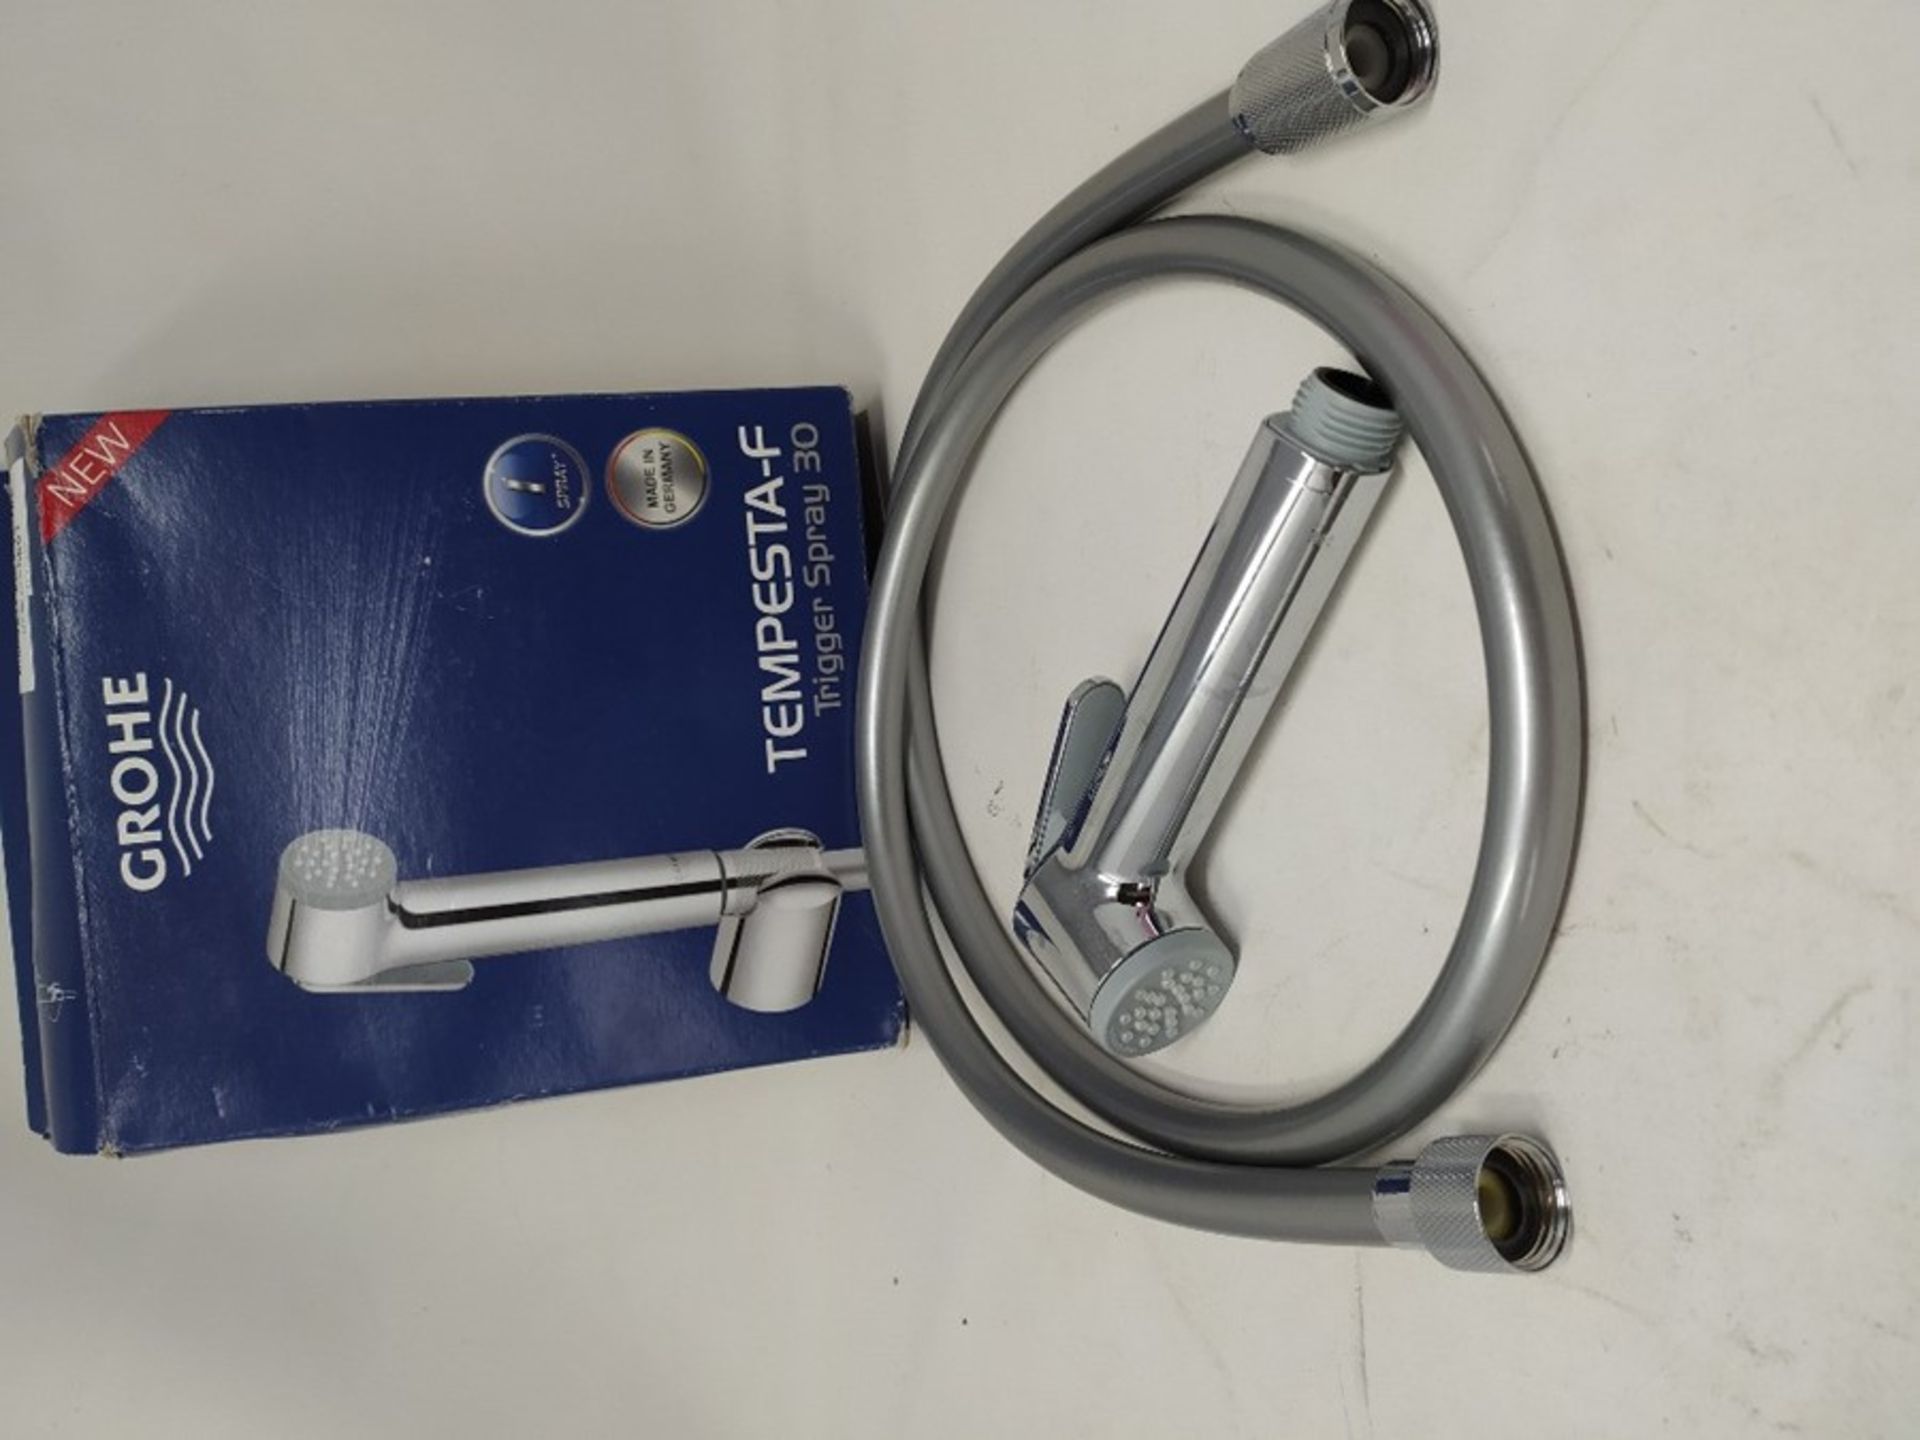 Grohe Tempesta-F Trigger Spray 30 27513001 1-Jet Shower Set with Wall Mount - Image 2 of 2